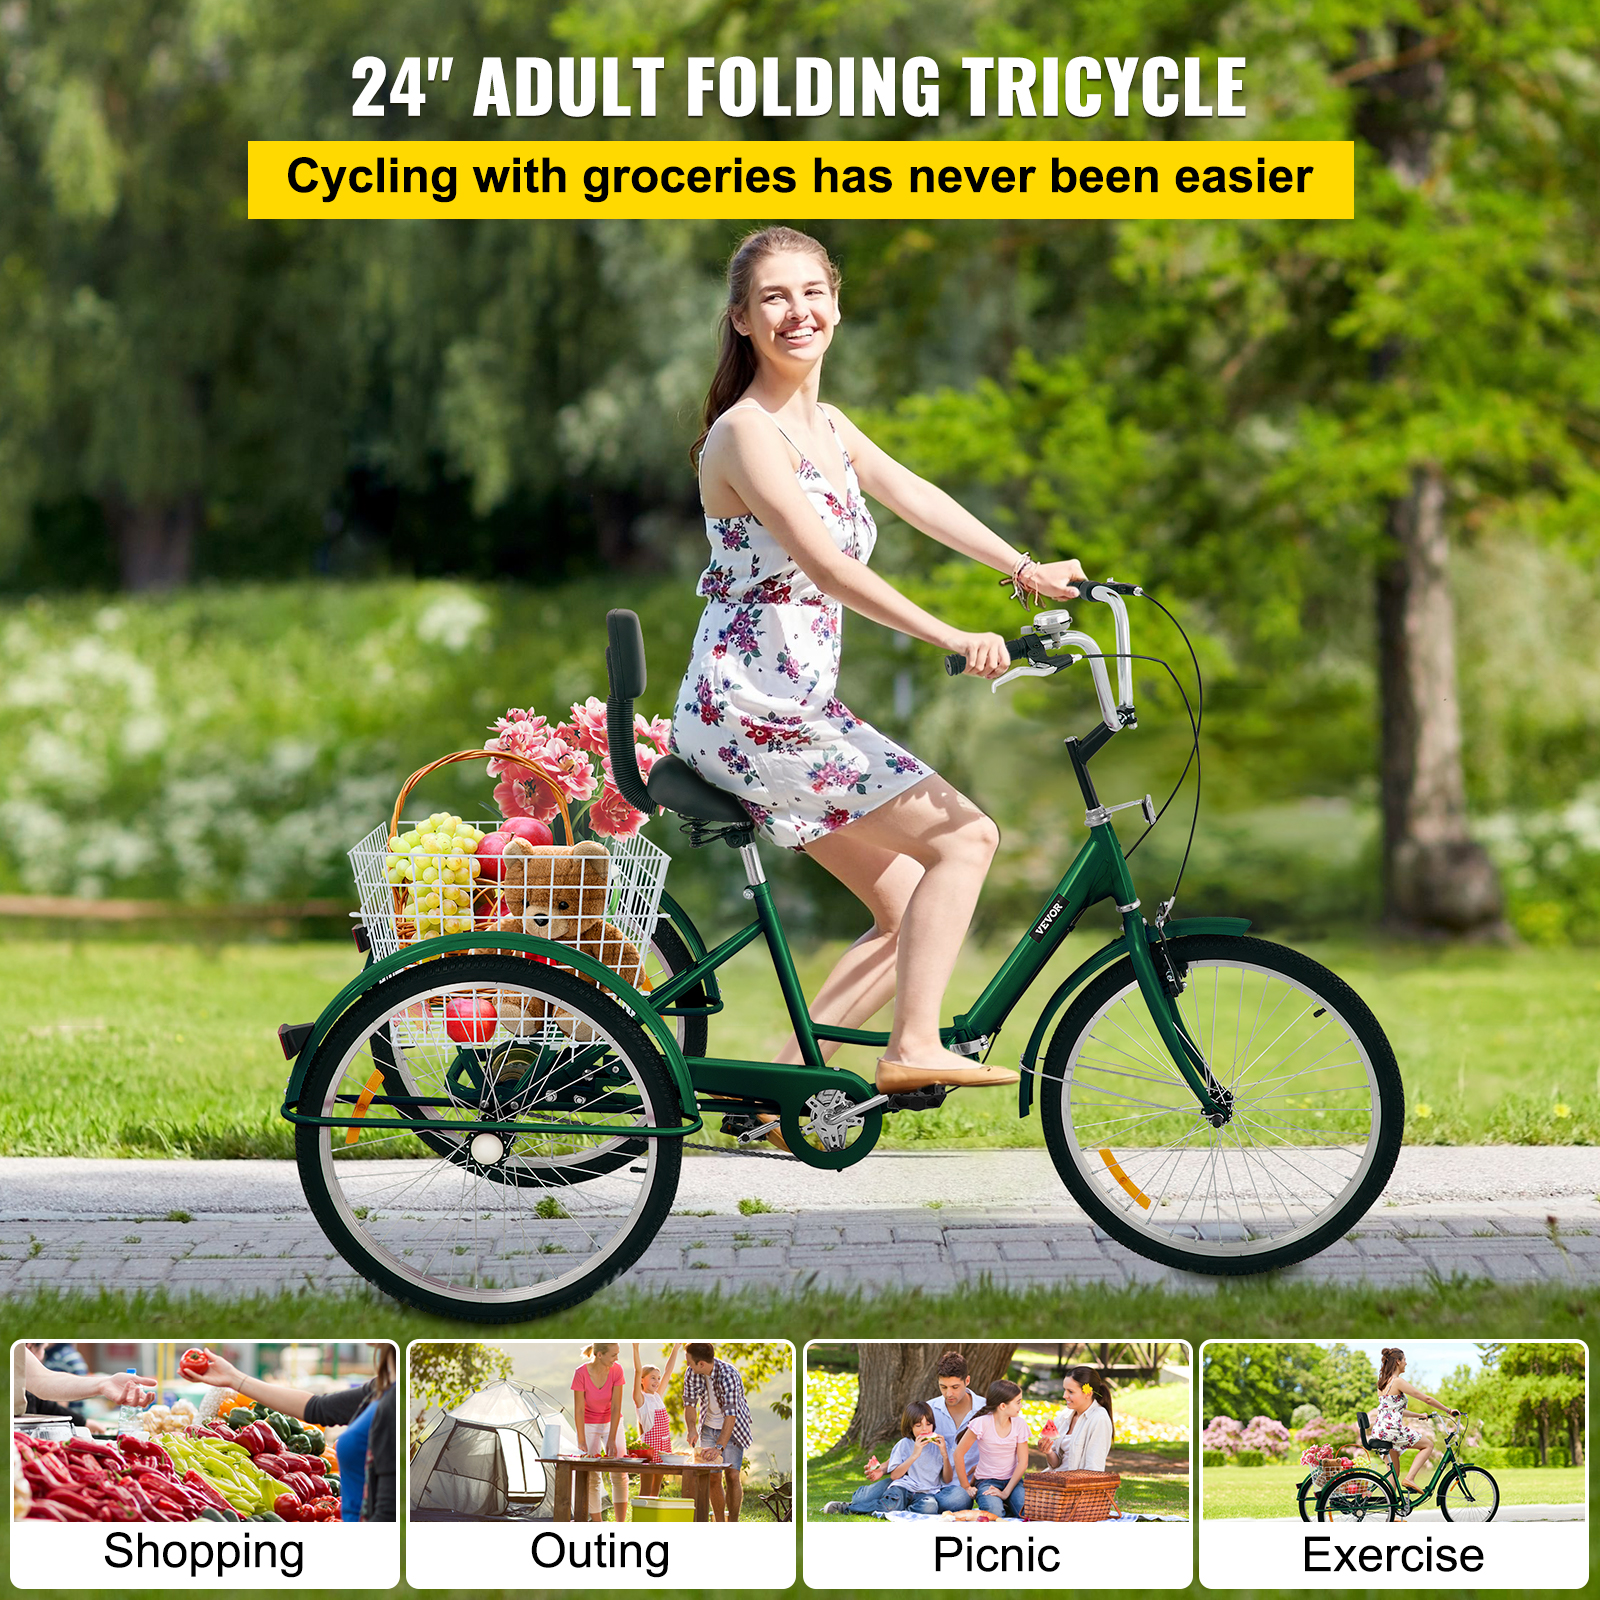 VEVOR Foldable Tricycle 24" Wheels, 1-Speed Trike,3 Wheels Colorful Bike with Basket,Portable and Foldable Bicycle for Adults Exercise Shopping Picnic Outdoor Activities - image 2 of 9